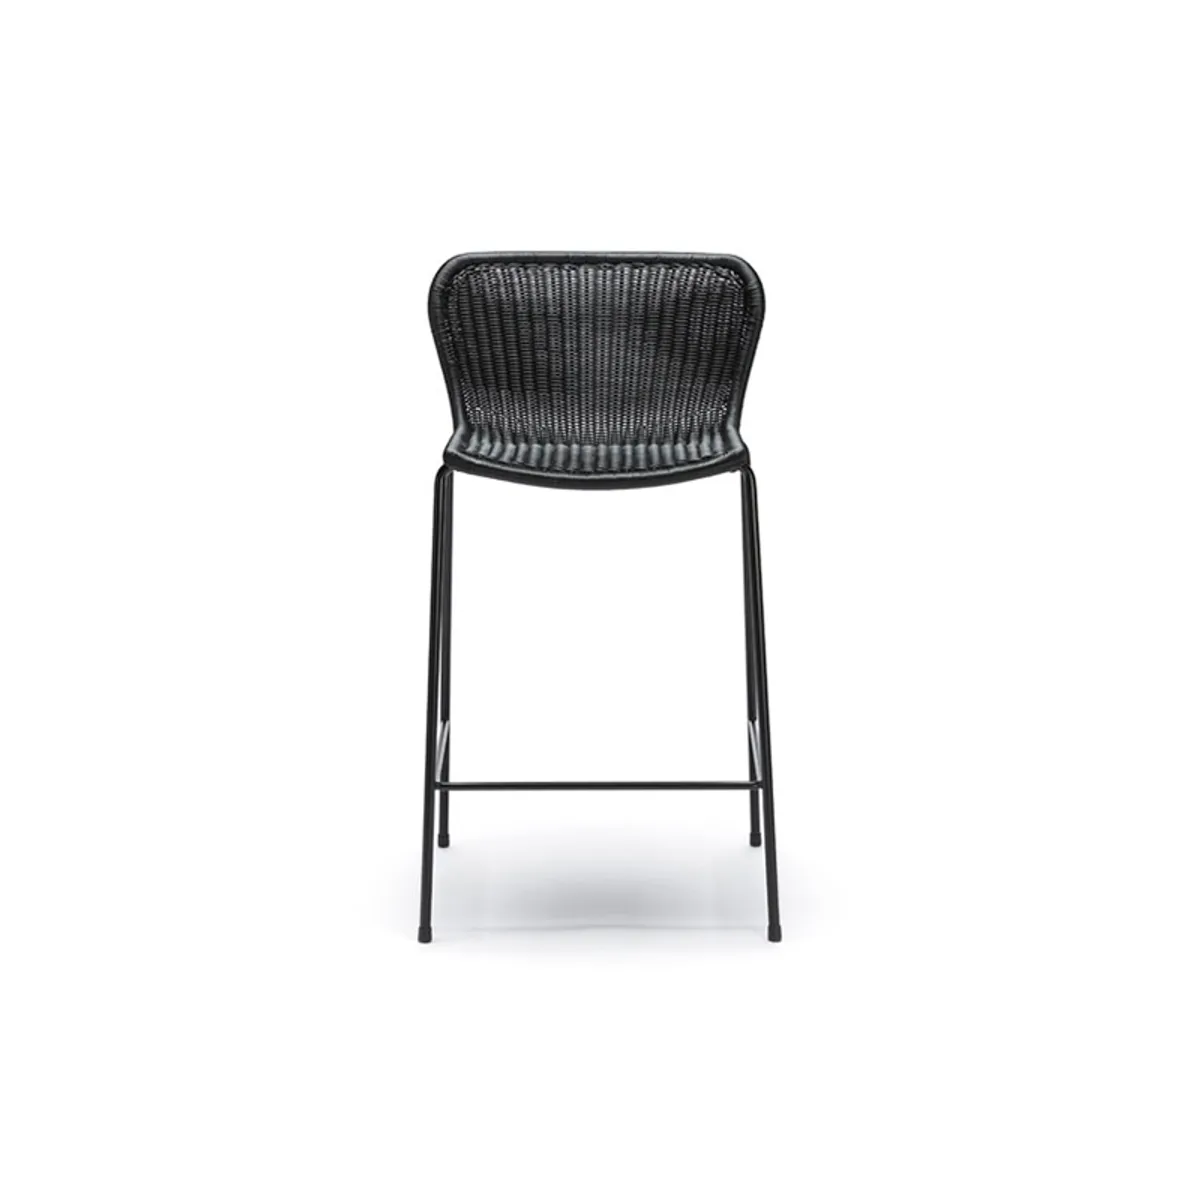 Harriet Bar Stool Wicker Seat With Metal Legs For Outdoor Use 014